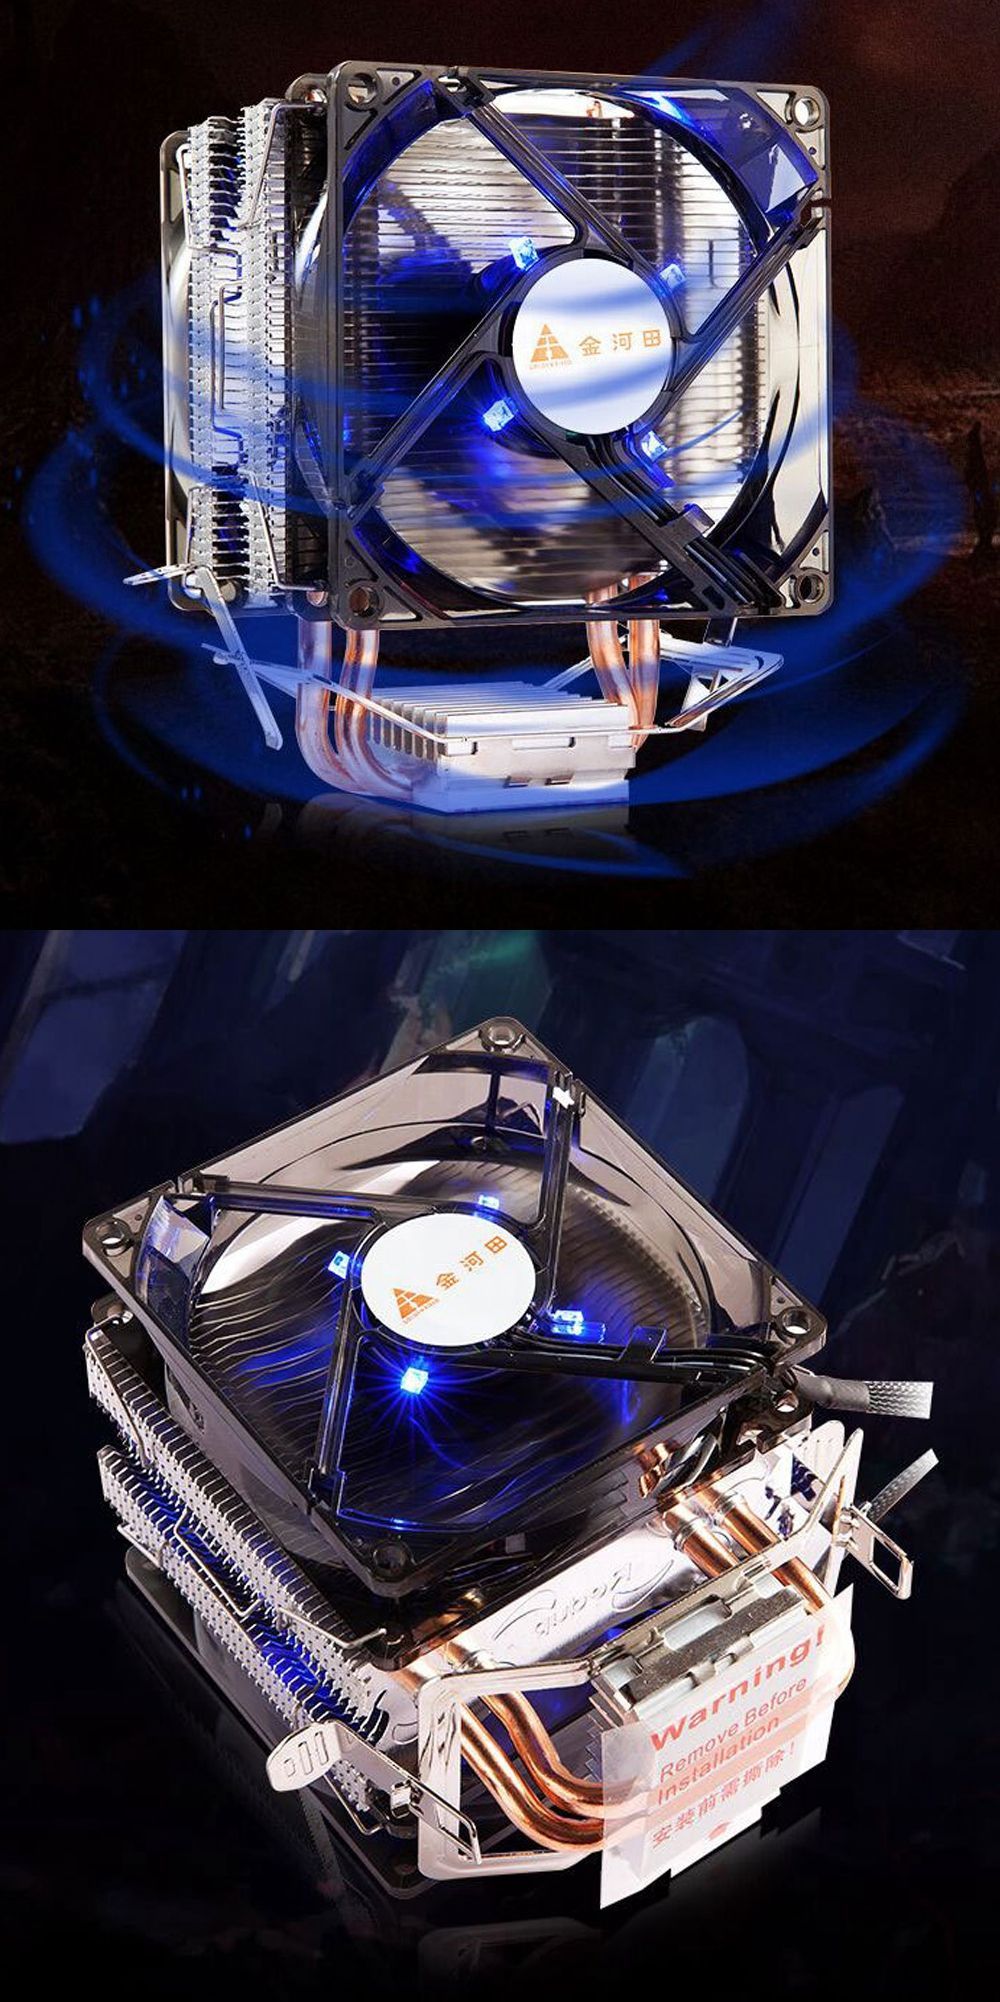 1PCS-90mm-Blue-LED-PWM-CPU-Cooler-CPU-Cooling-Fan-U-shaped-Double-Heat-Pipe-Heat-Sink-with-Thermal-S-1600920